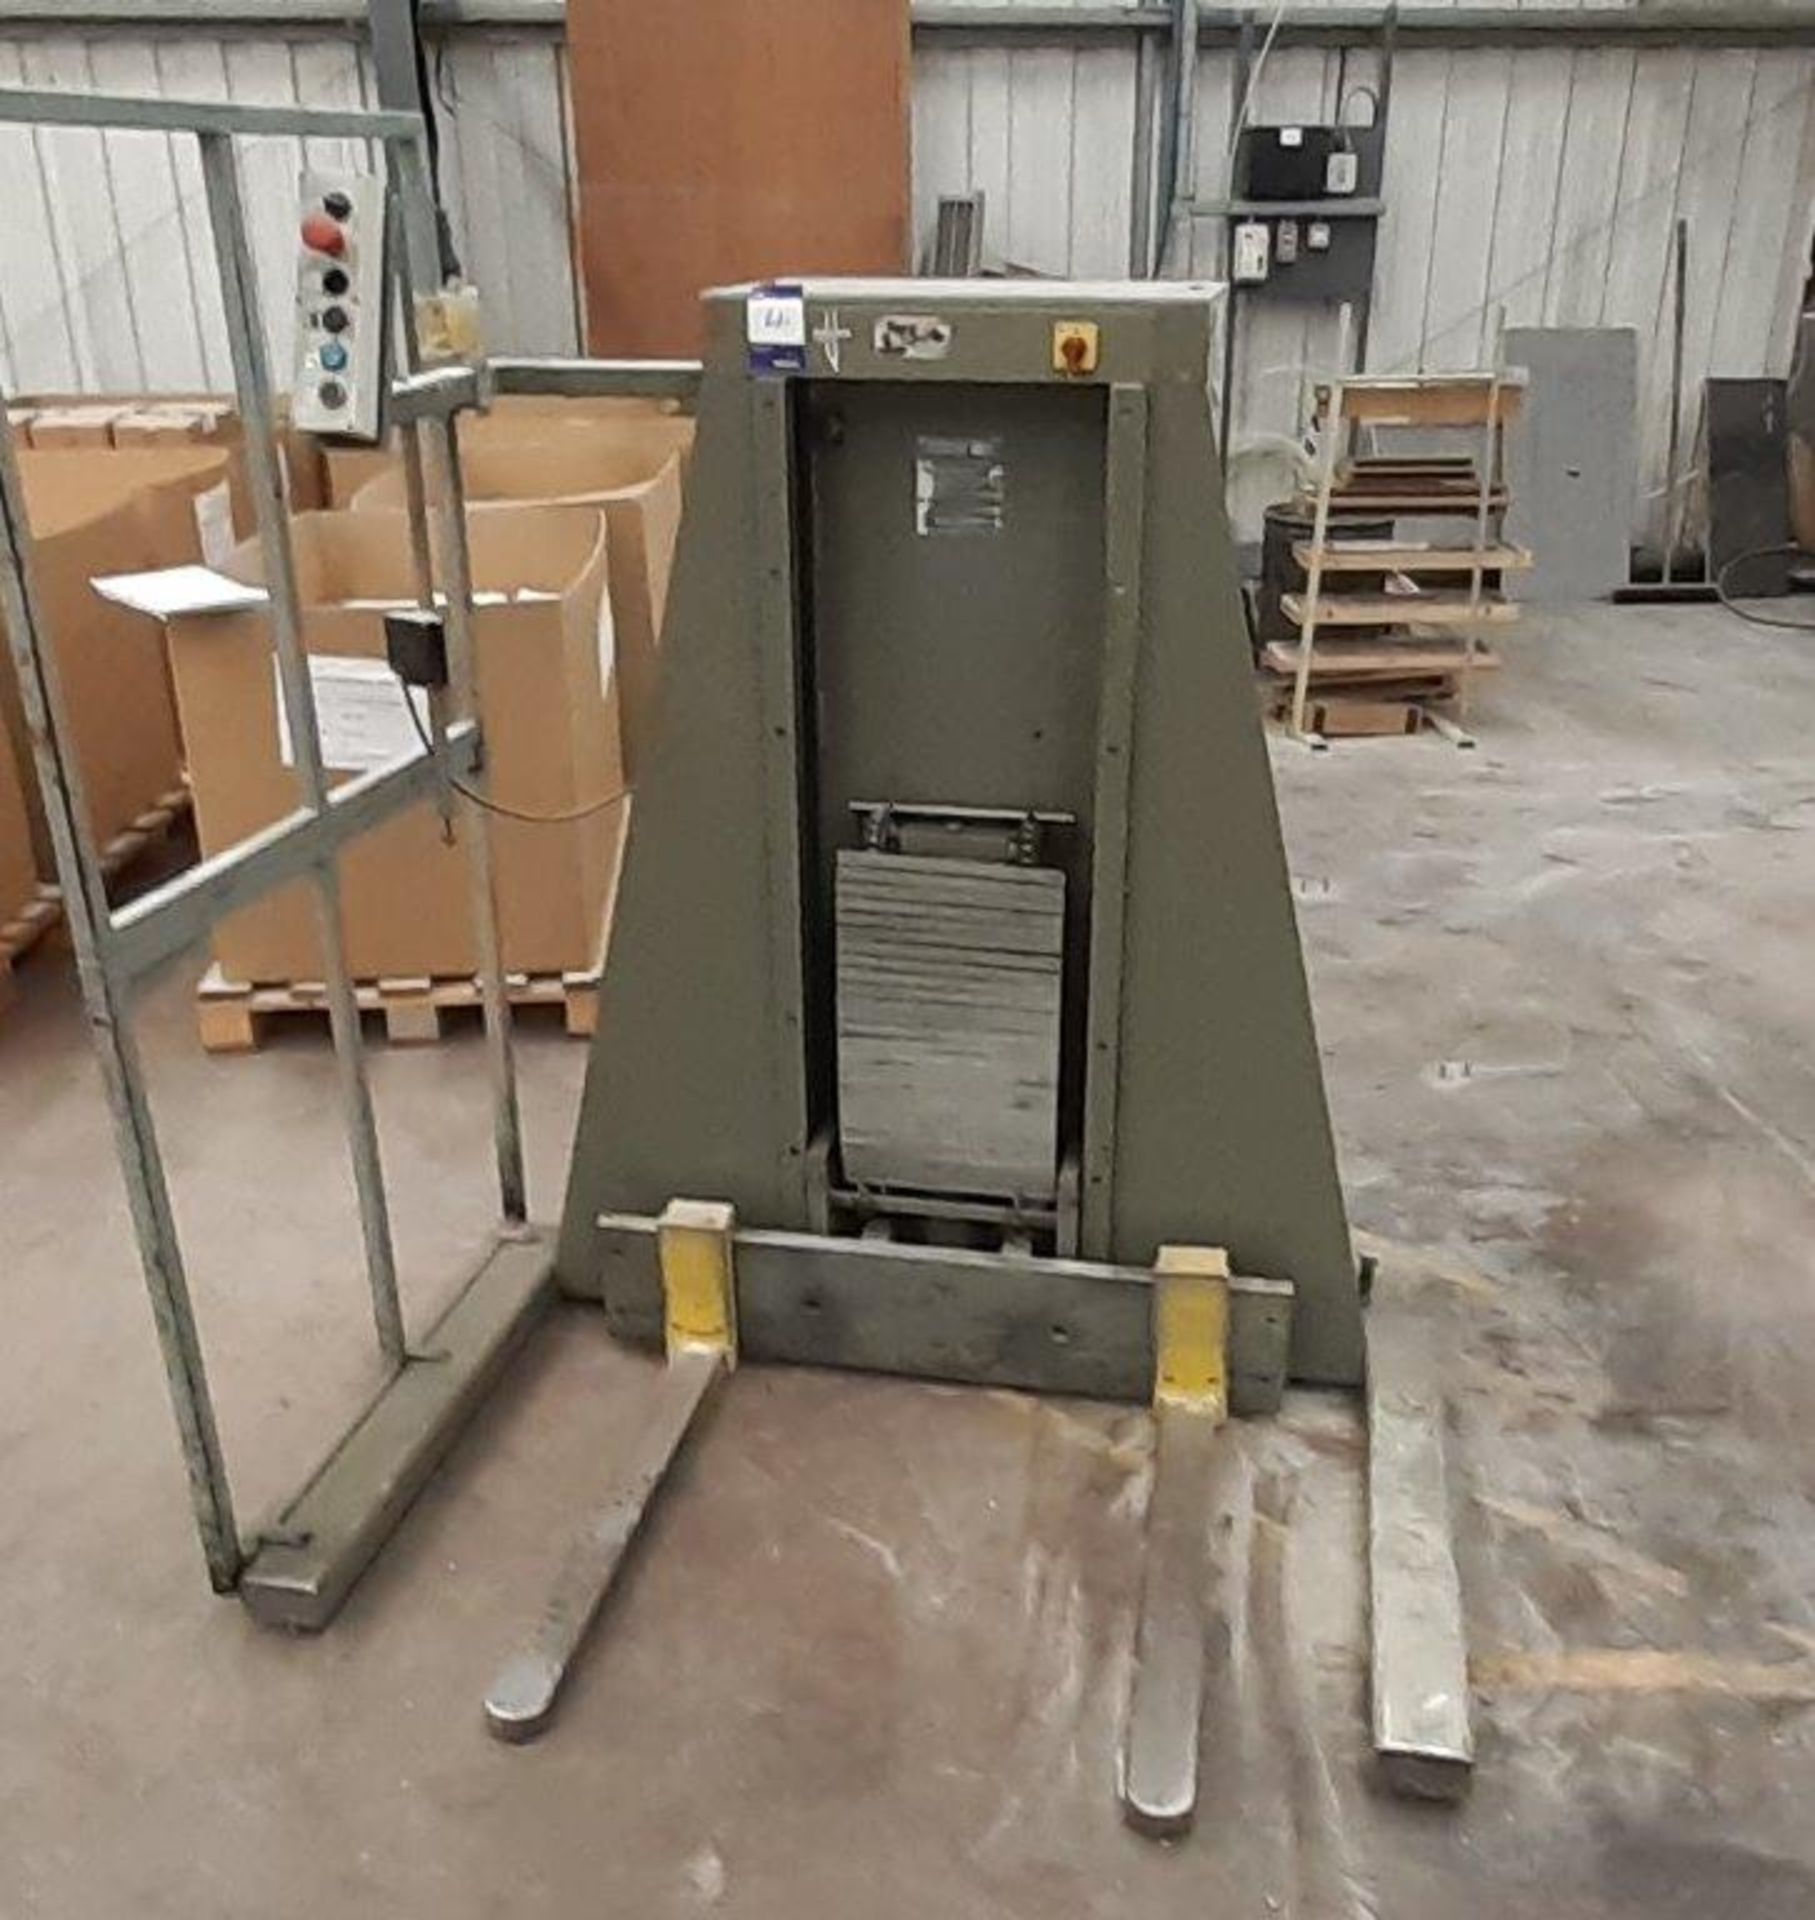 Polar L600-3 Stack Lifter, serial number 5872233